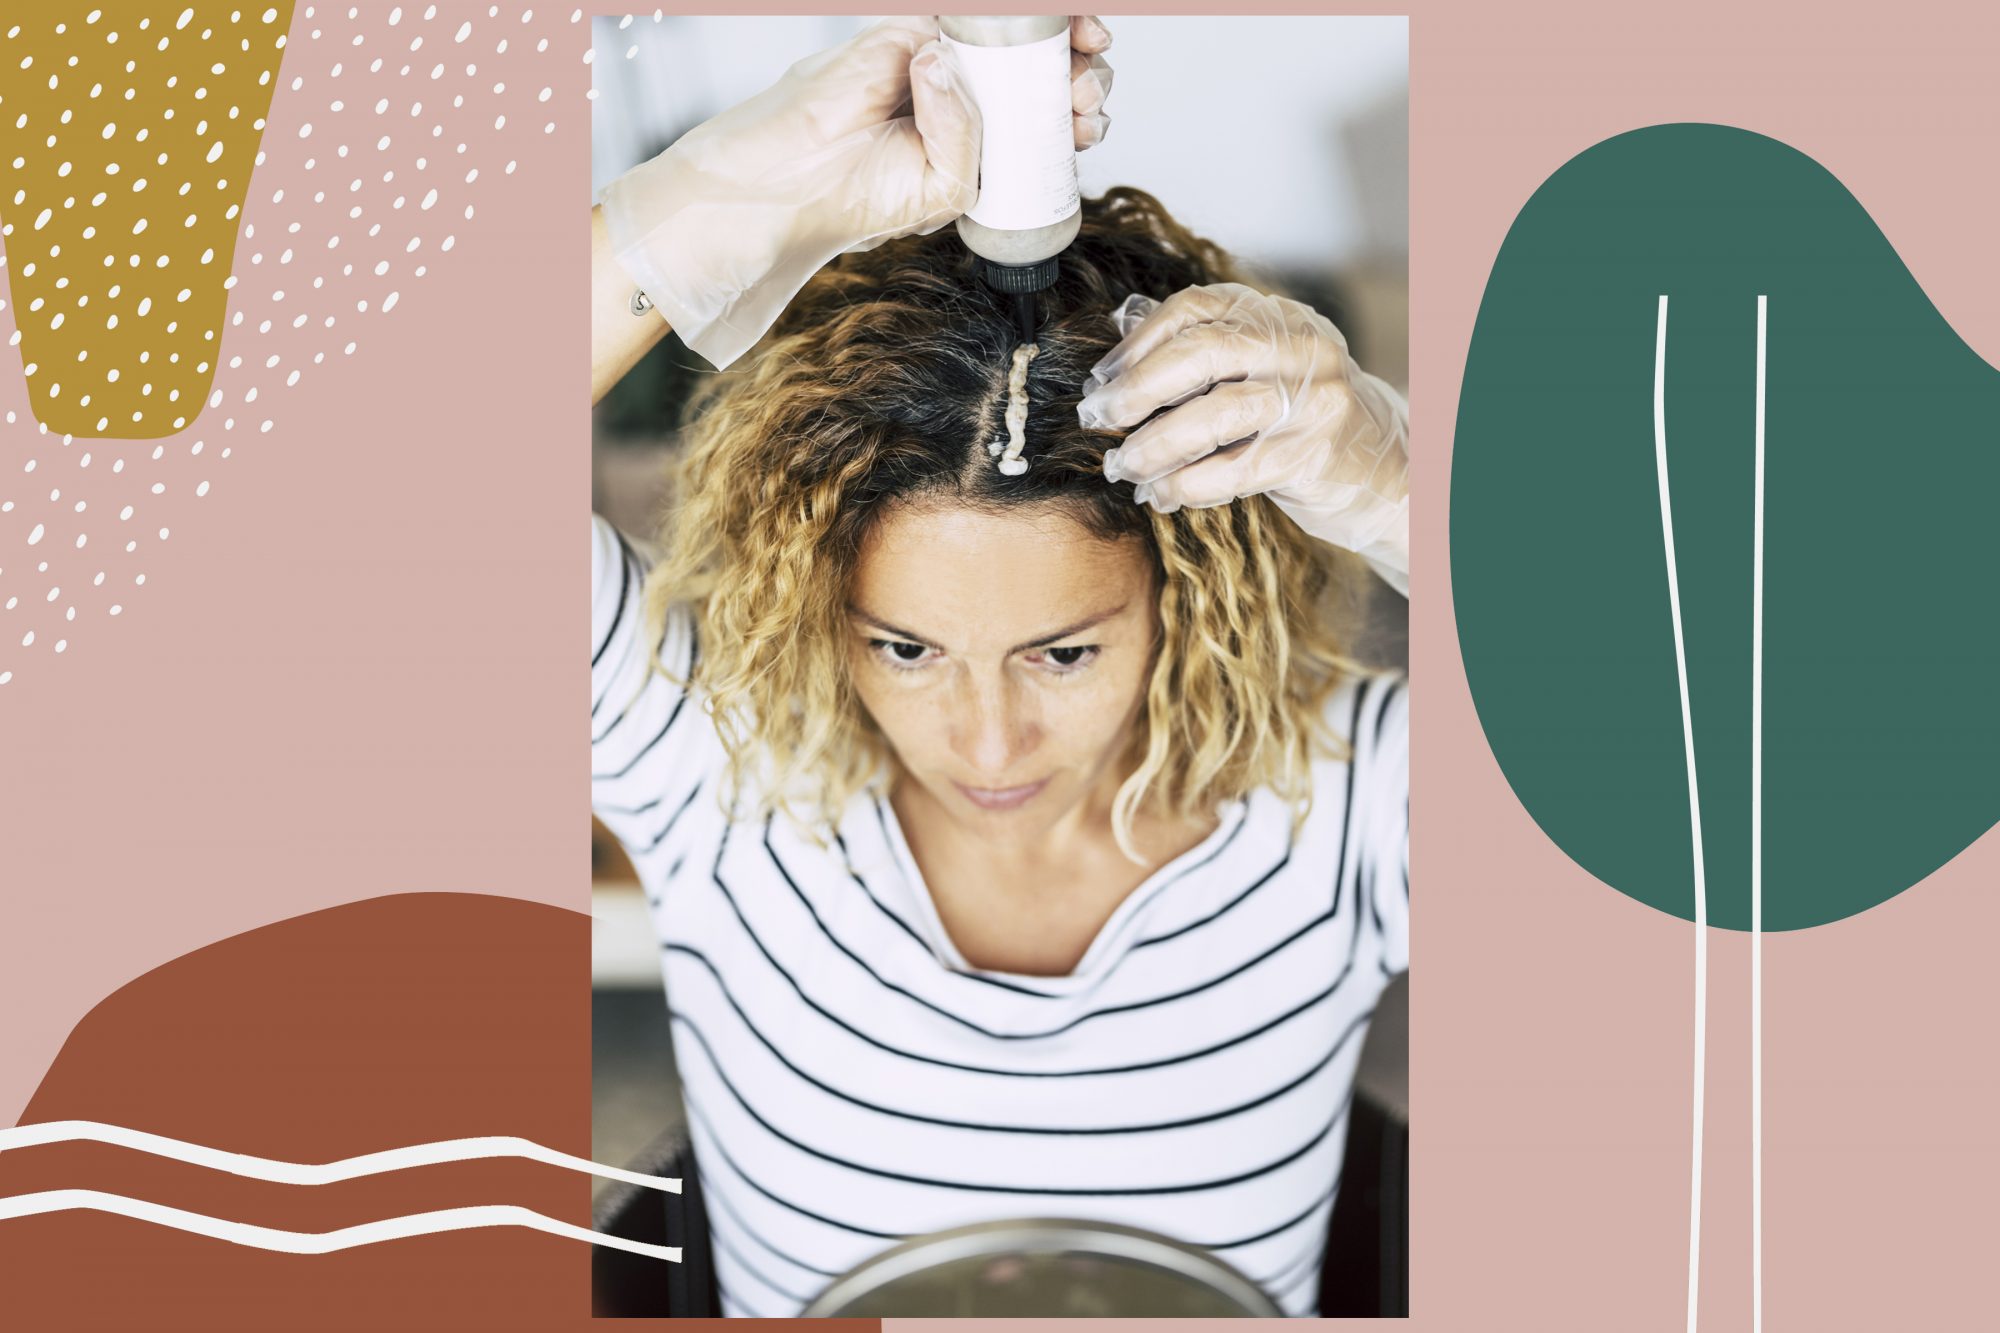 10. "Blonde Hair Colour Maintenance: How Often Should You Touch Up Your Roots?" - wide 4